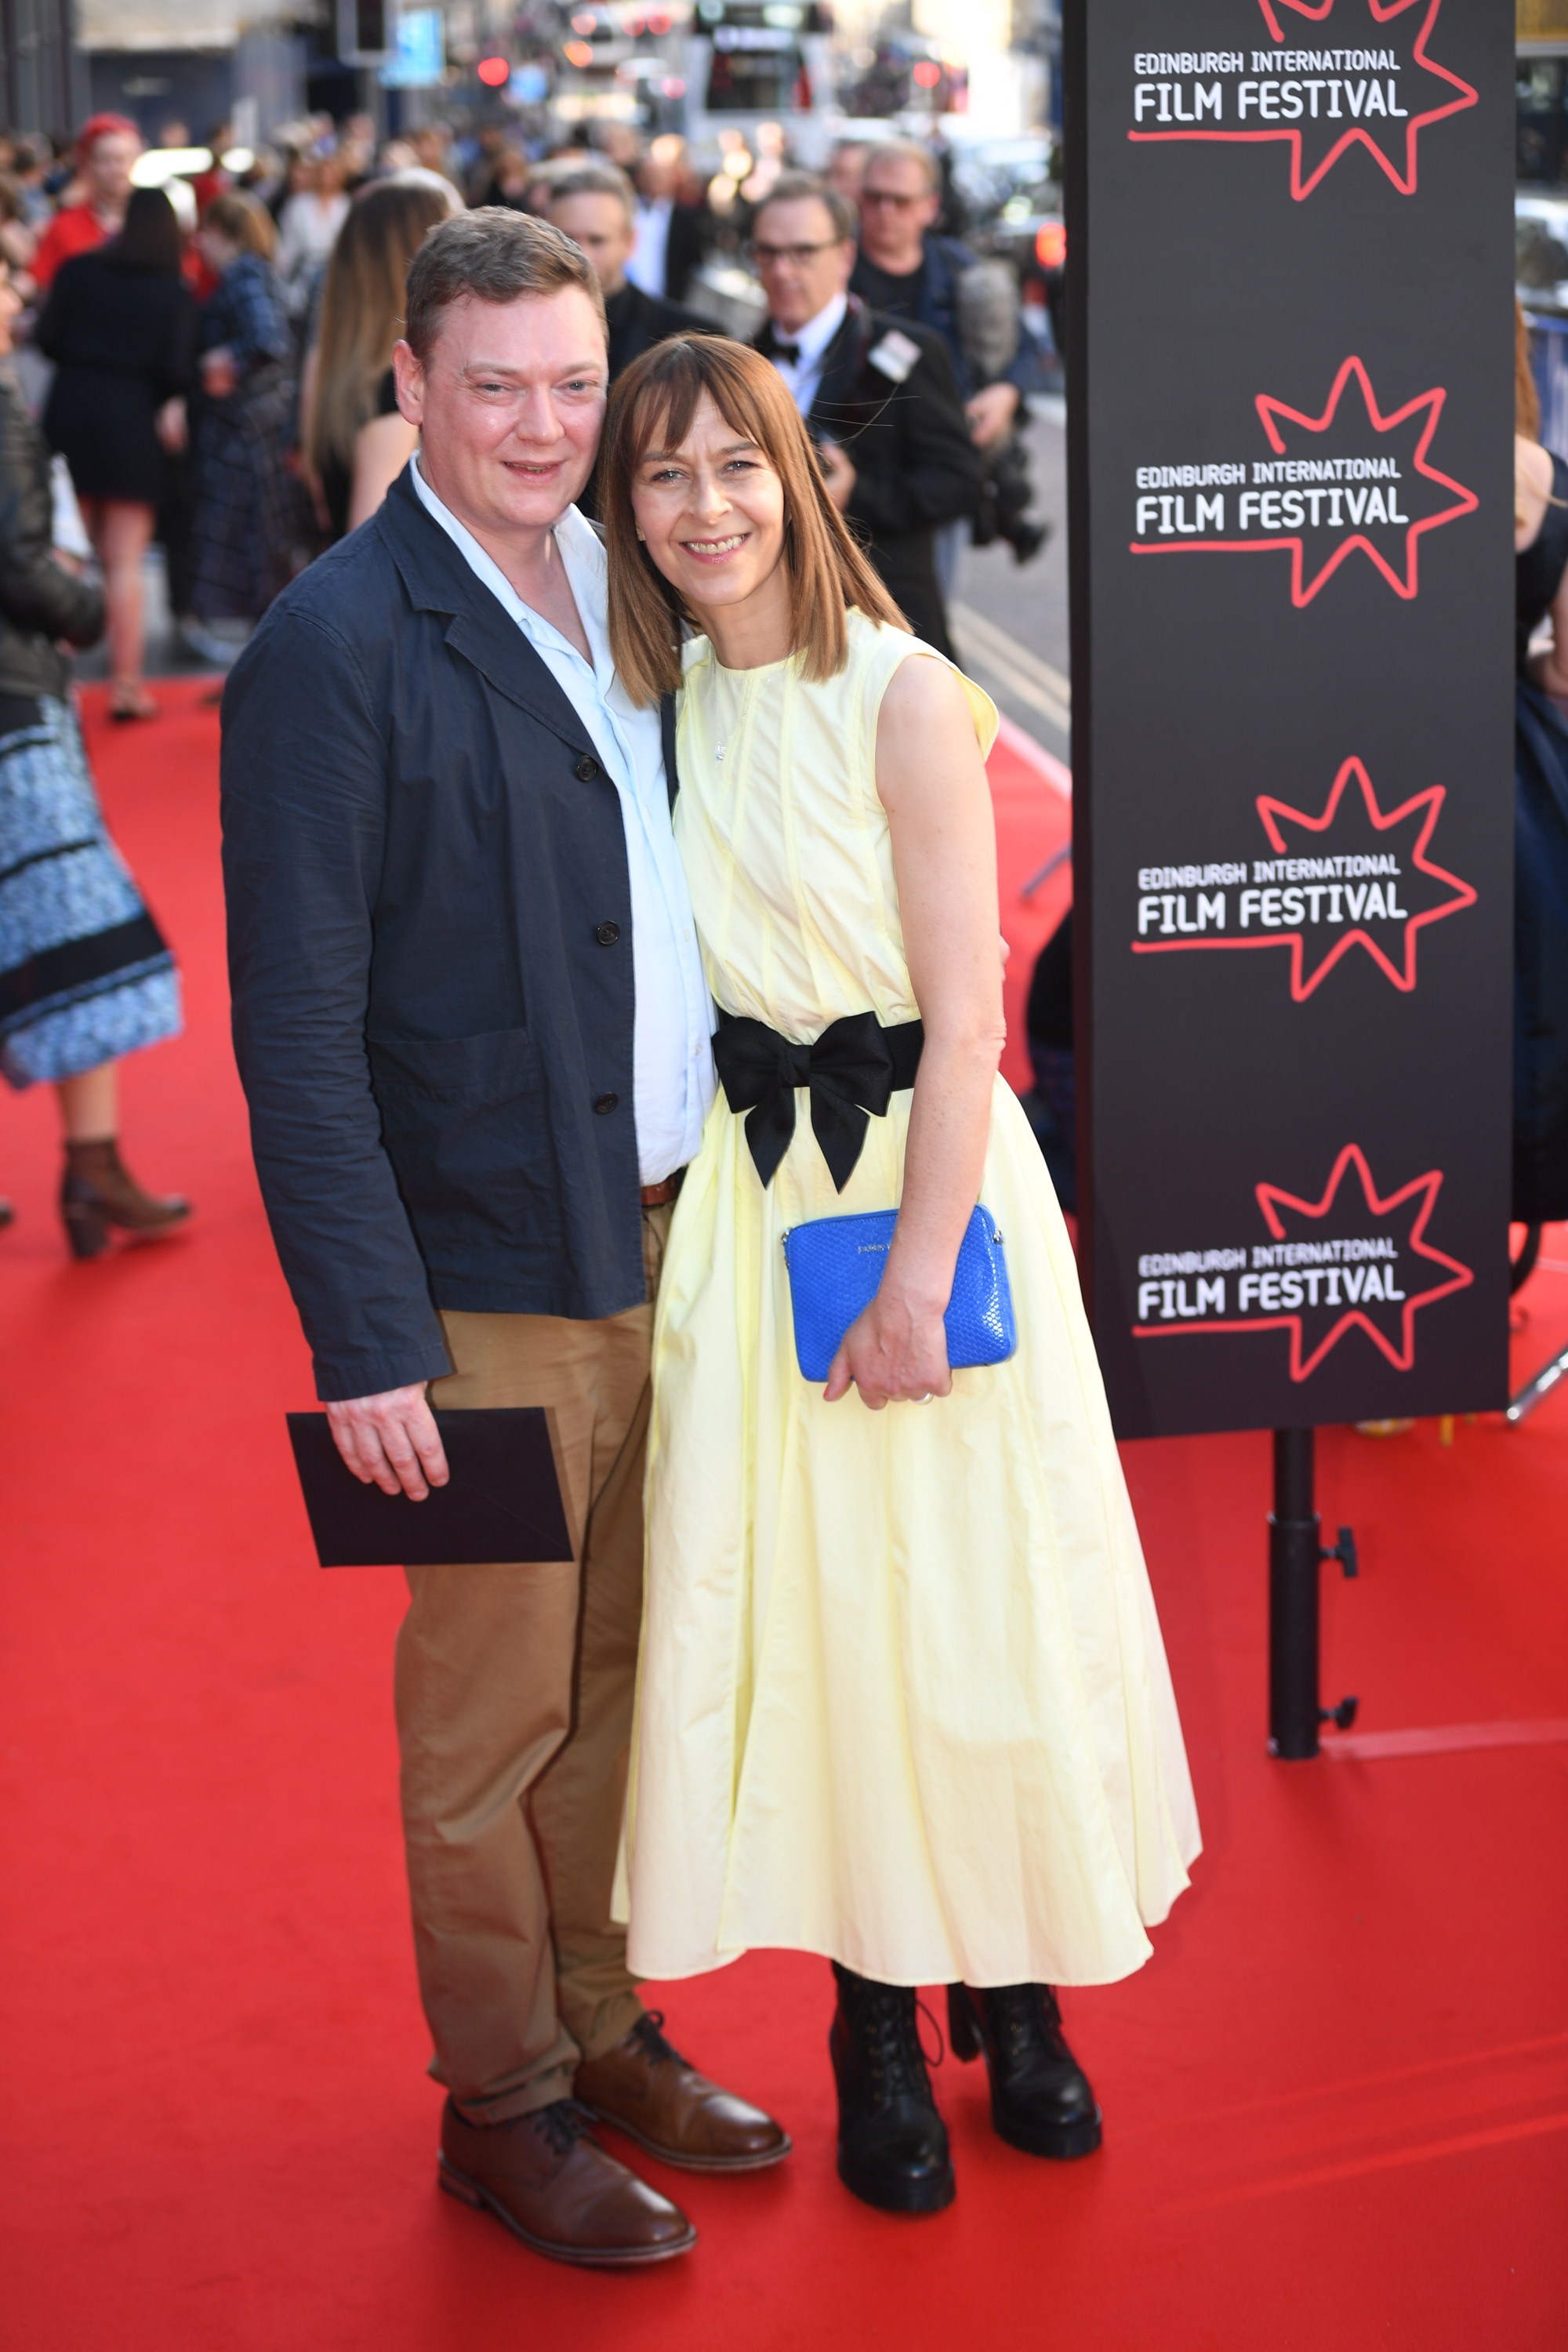 Kenny Dickie and Kate Dickie attend the European premiere of "Boyz In The Wood" and opening night gala of the 73rd Edinburgh International Film Festival at Festival Theatre on June 19, 2019, in Edinburgh, Scotland. | Source: Getty Images